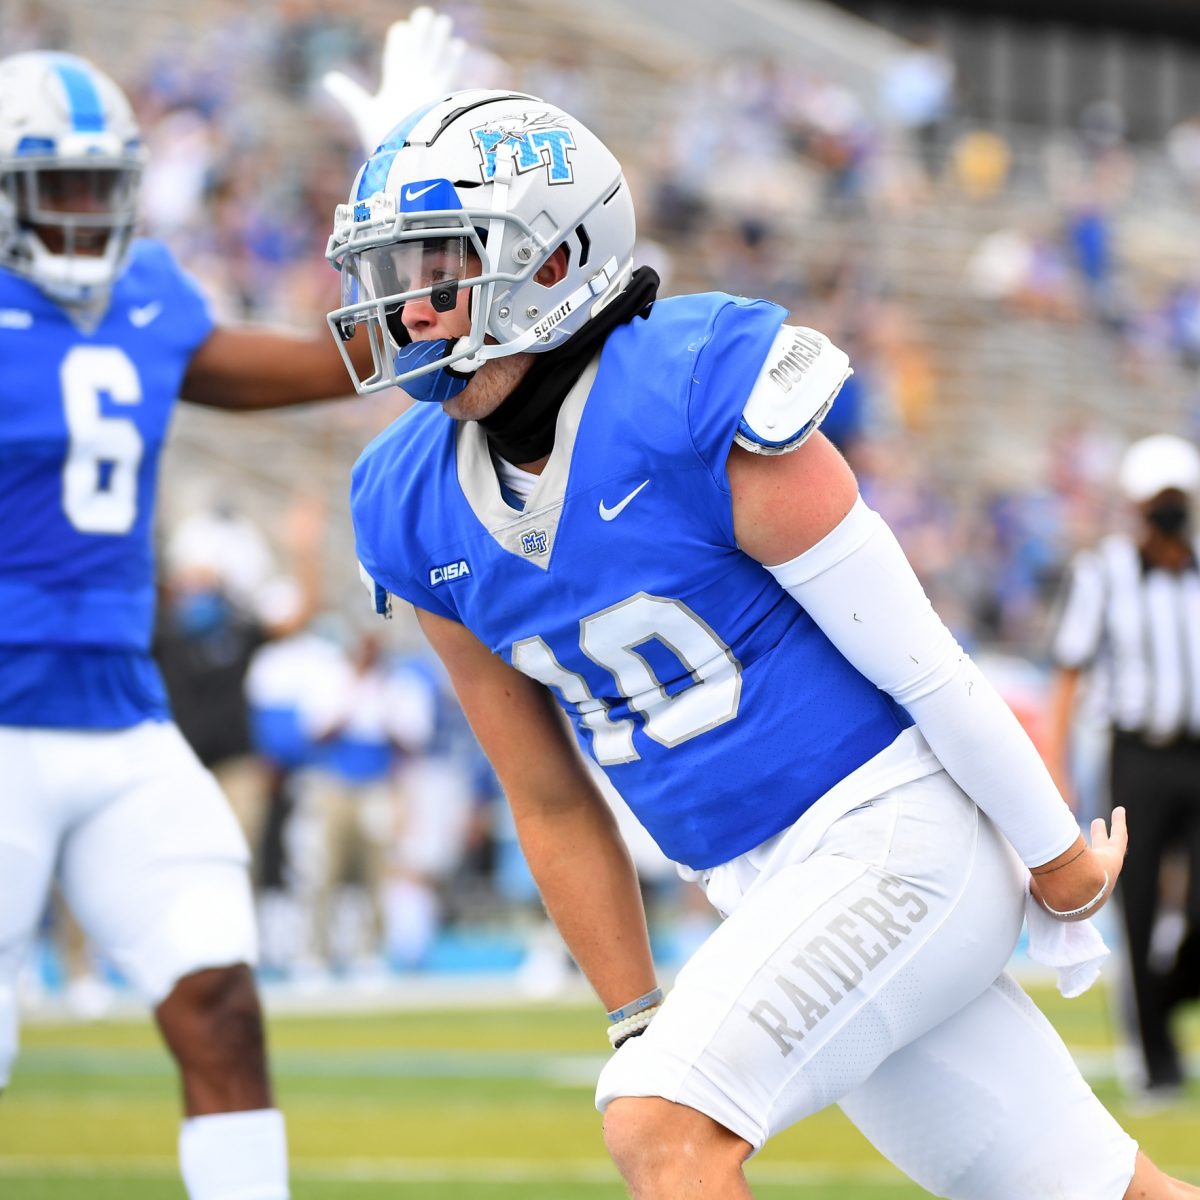 Florida Atlantic (FAU) vs. Middle Tennessee State Prediction, Preview, and Odds - 11-19-2022